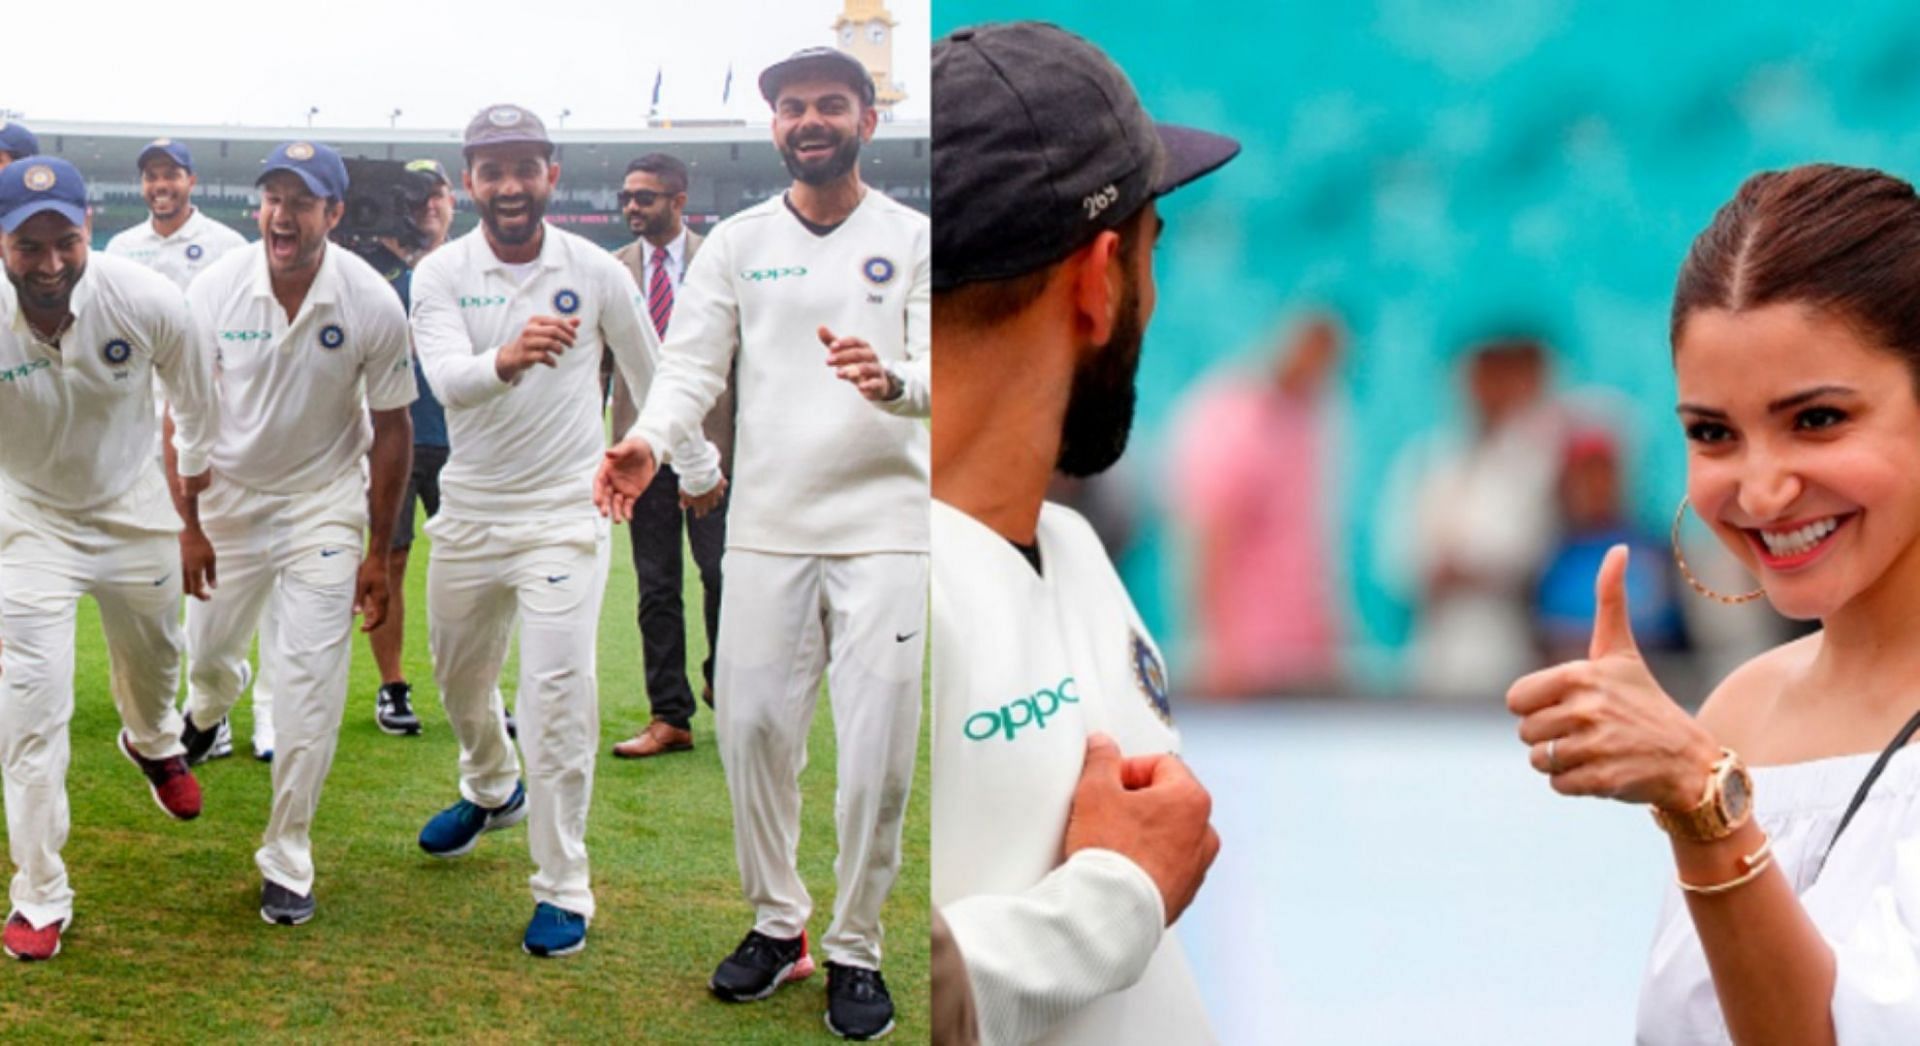 Indian players celebrated wildly after the incredible achievement